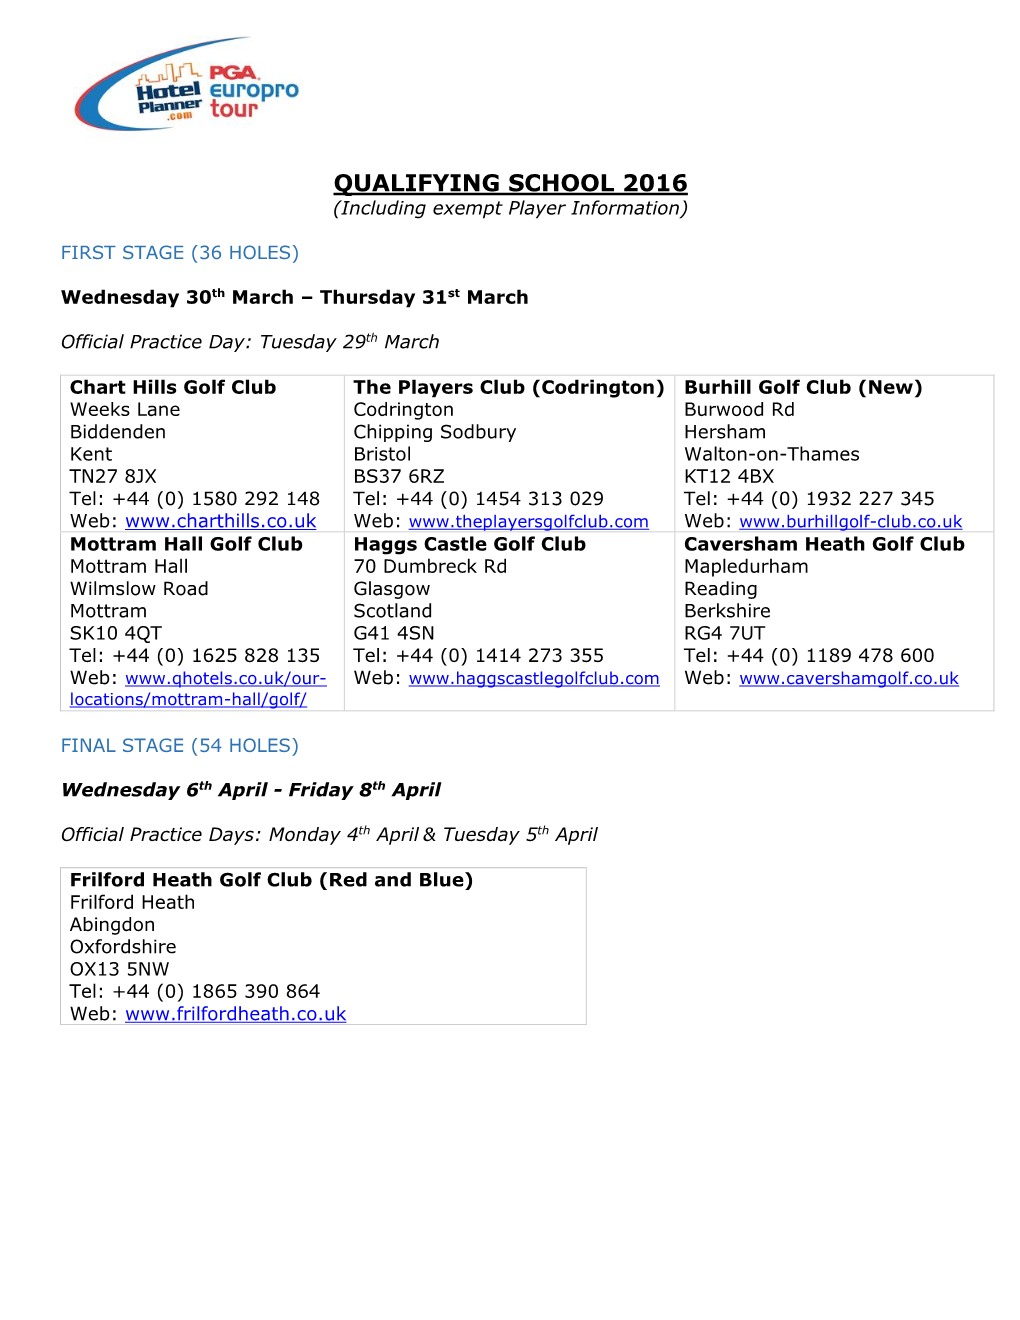 QUALIFYING SCHOOL 2016 (Including Exempt Player Information)